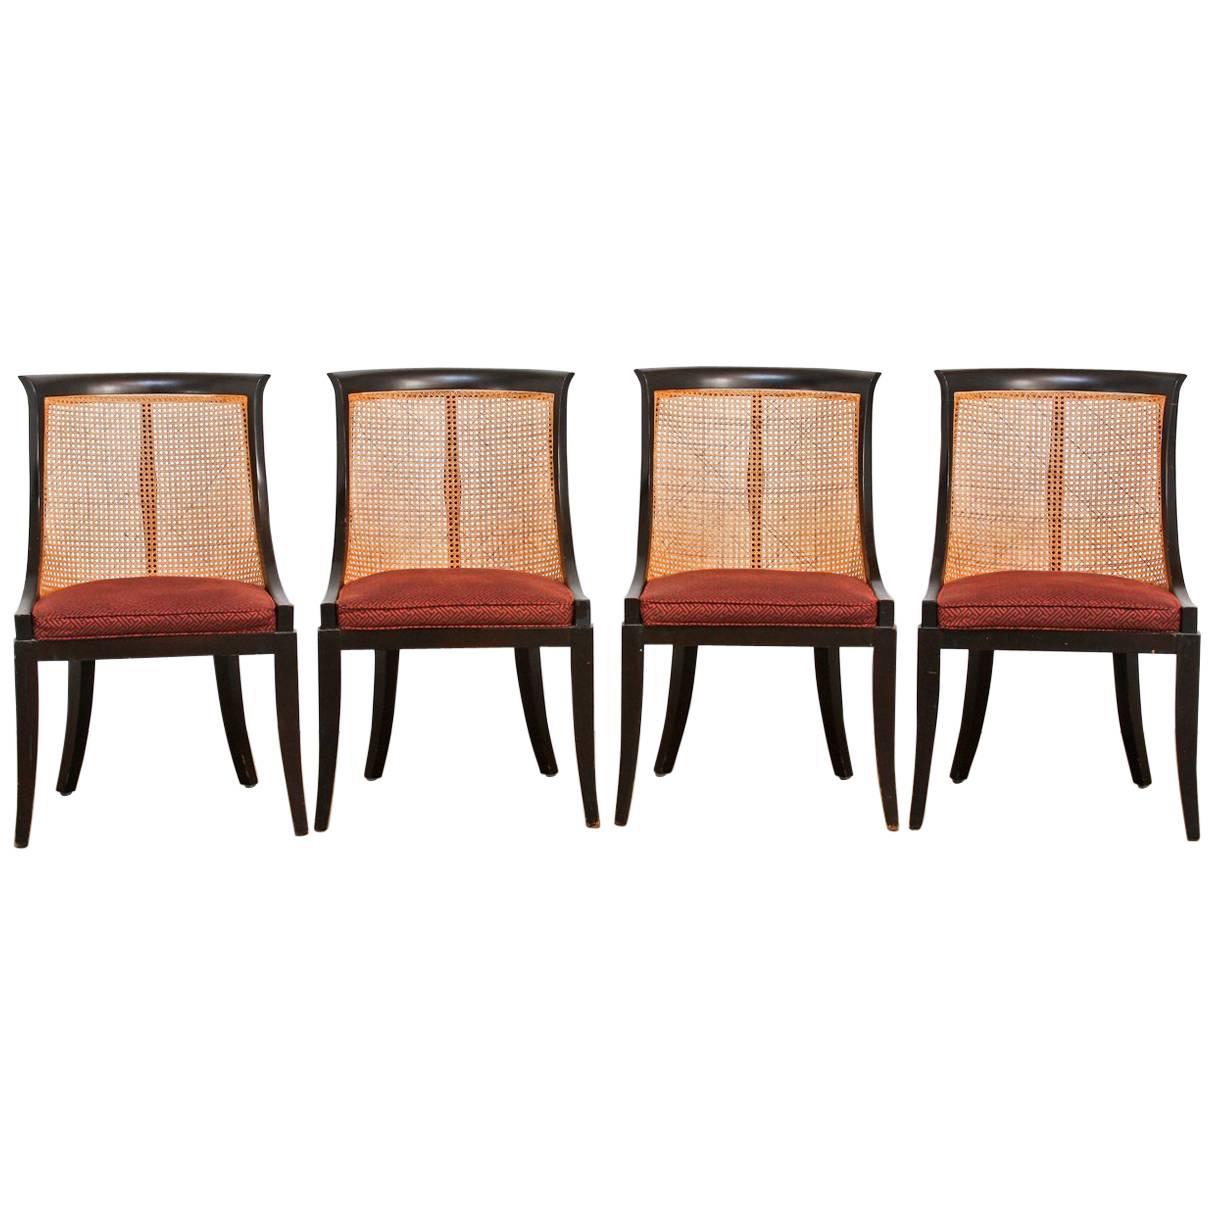 Set of Four James Mont Style Ebonized Dining Chairs